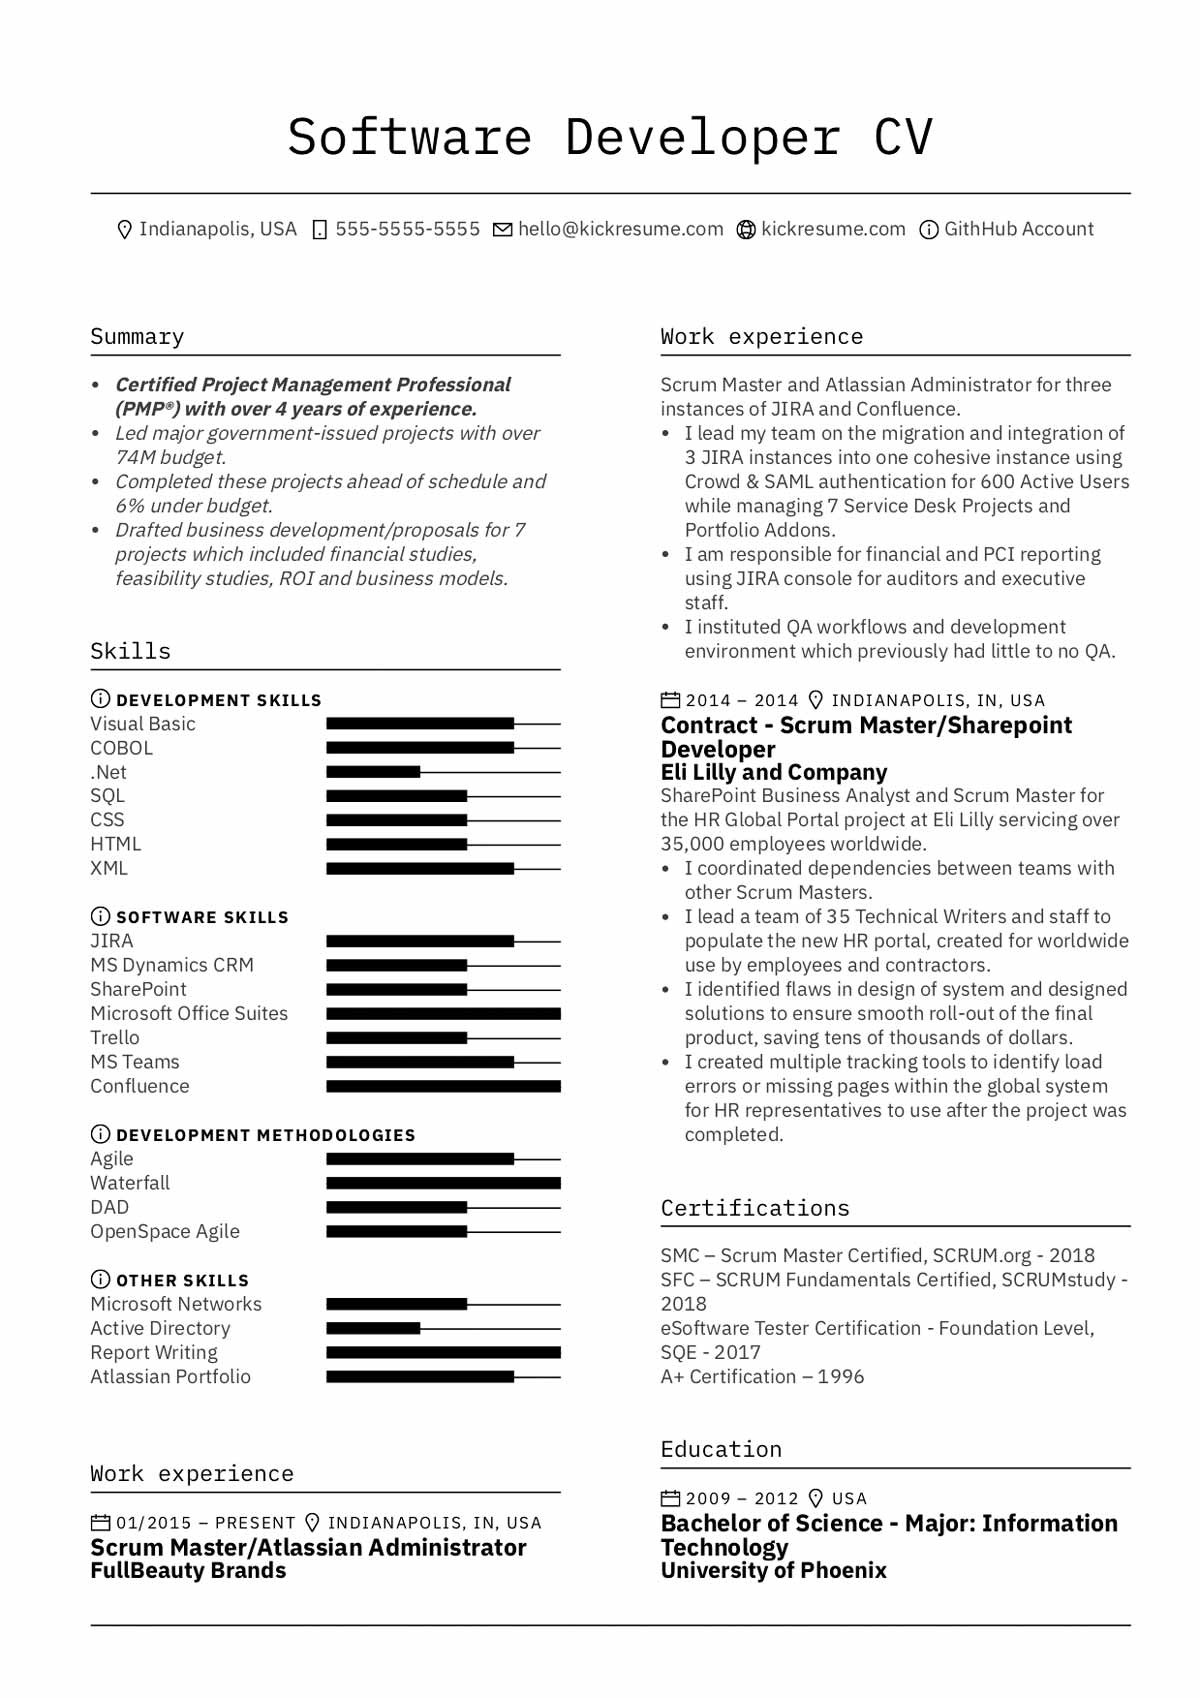 Kikresume Senior software Engineer Resume Sample with 15 Years Experience Quick Guide: How to Write A software Developer Cv